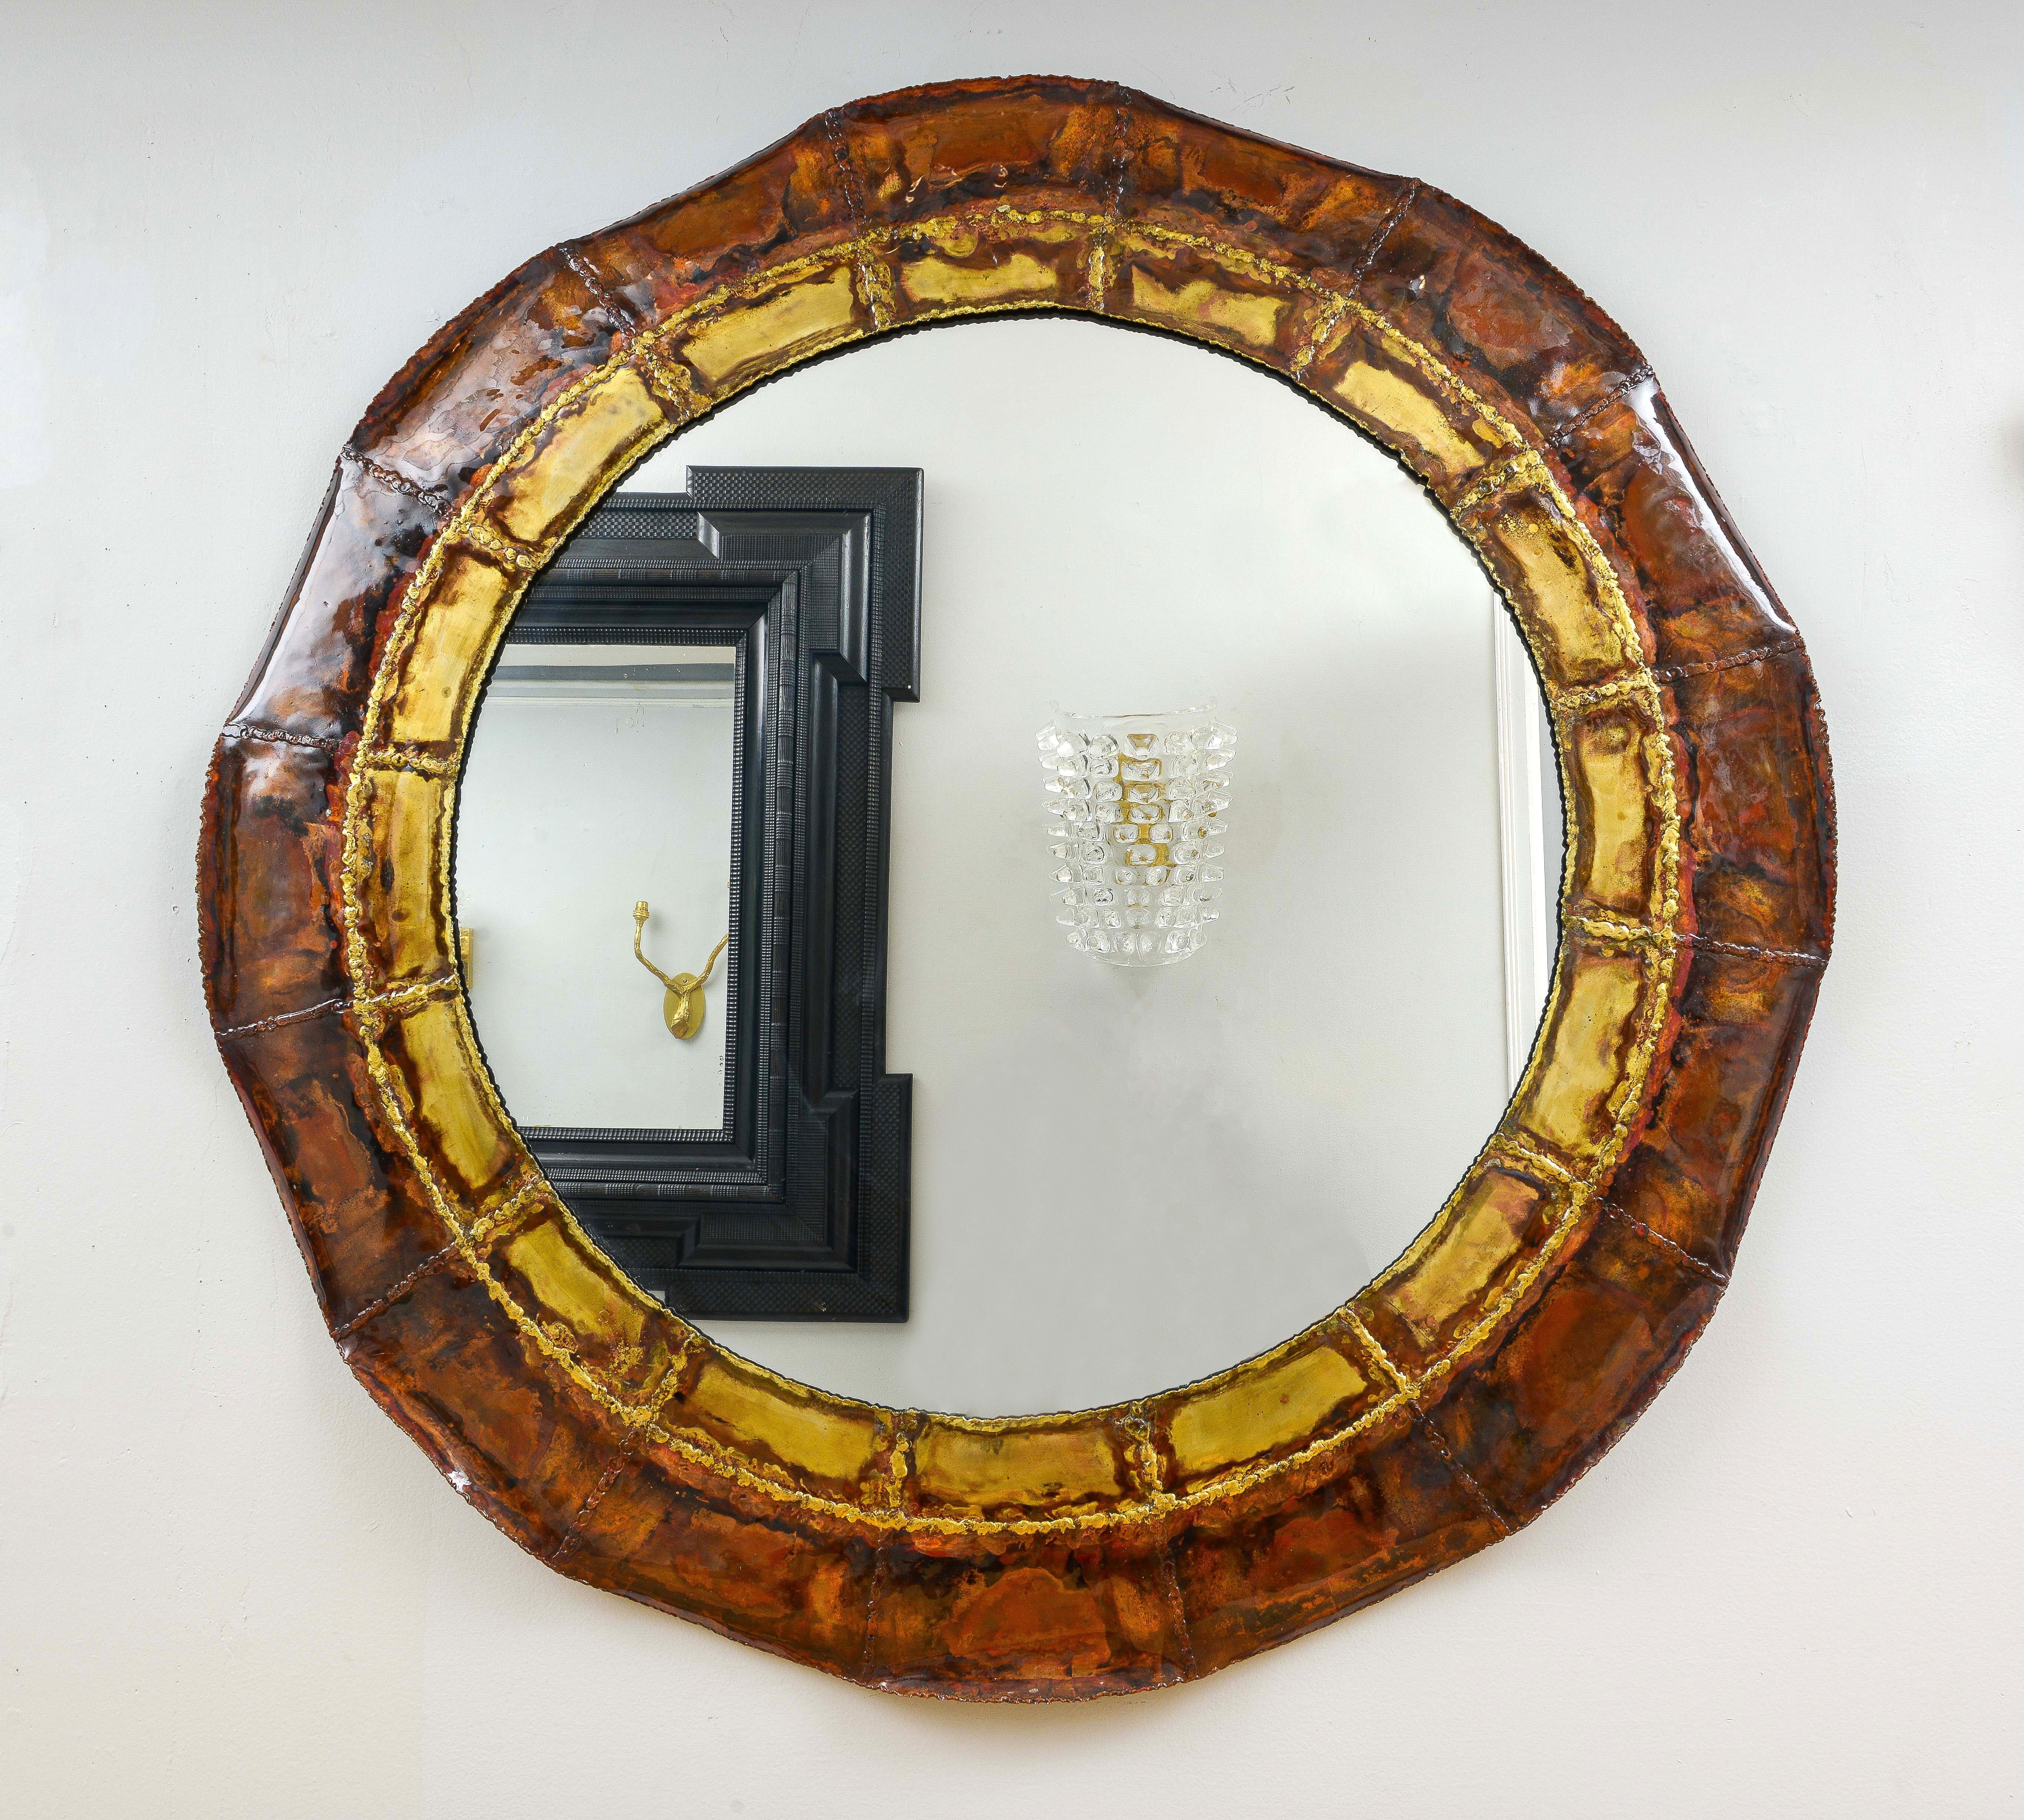 Beautifully hand-crafted Italian brass and copper enameled mirror.
Please note that this mirror can be custom made. One mirror is readily available.
Lead time for custom-made is 8-10 weeks.